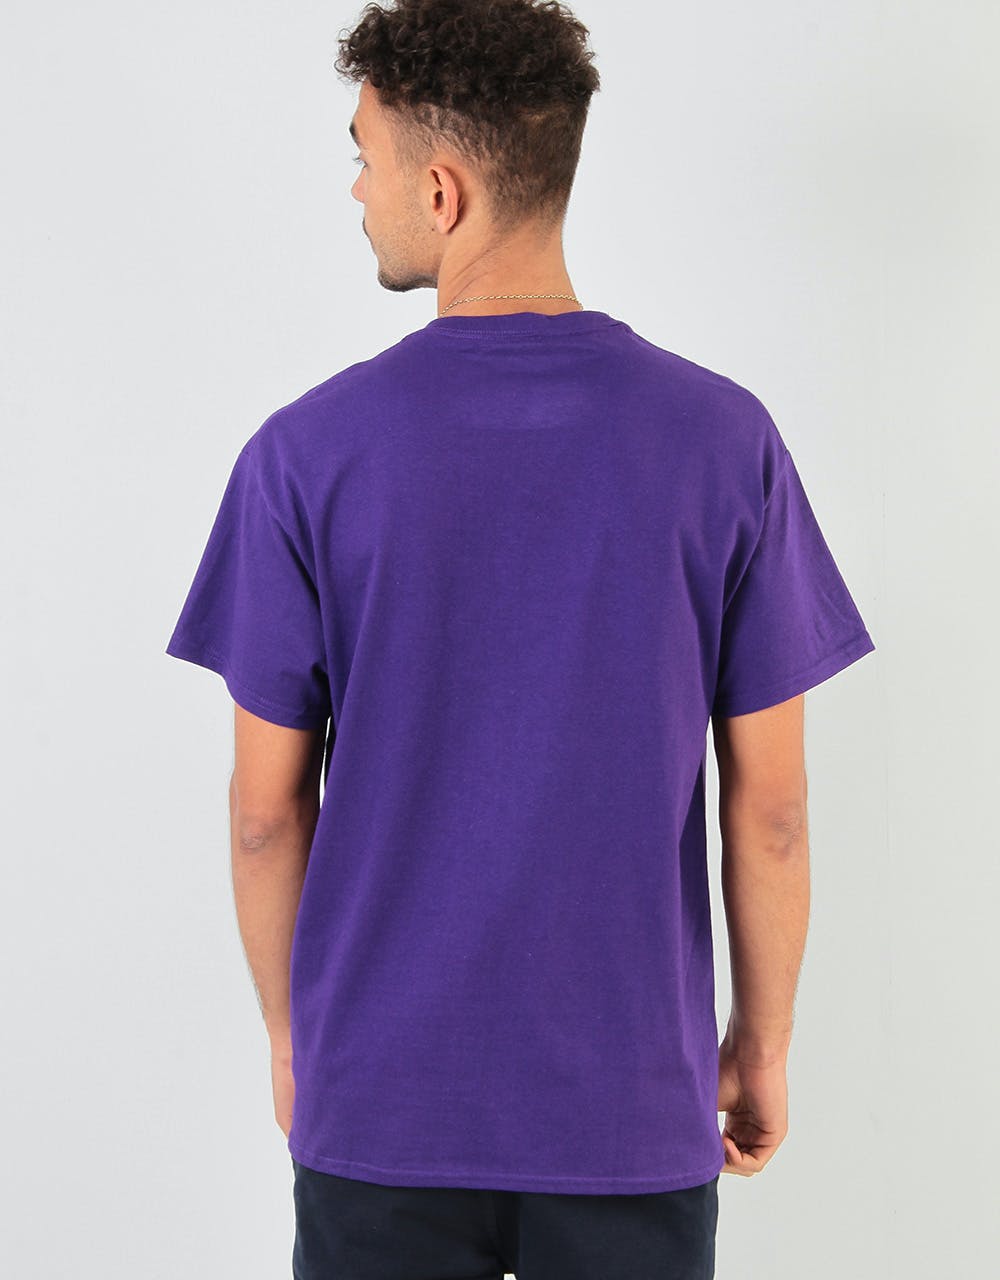 Route One Combust T-Shirt - Purple